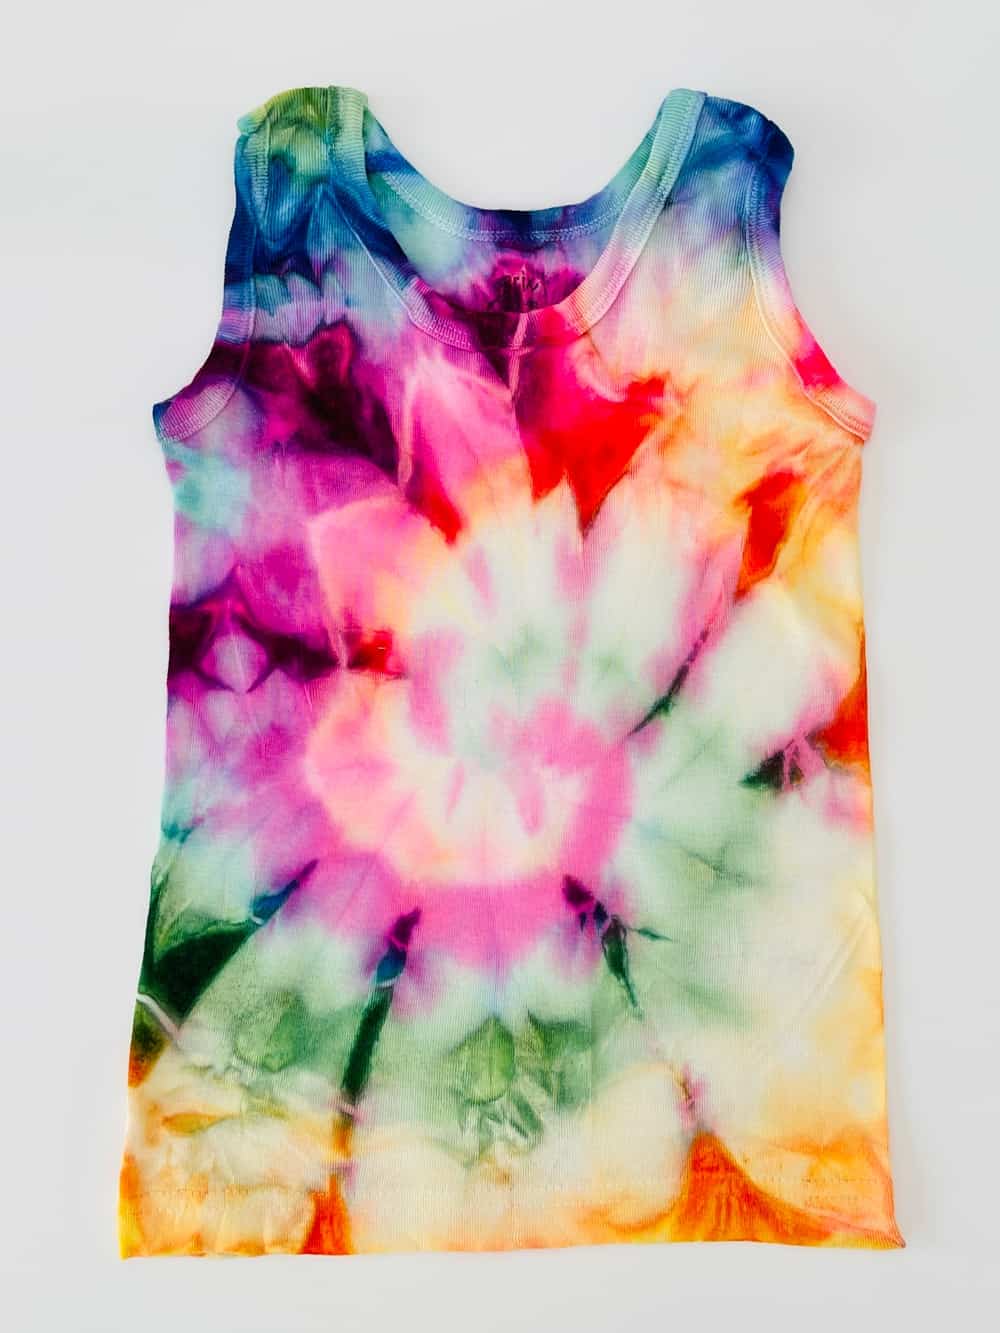 HOW TO TIE DYE WITH MARKERS